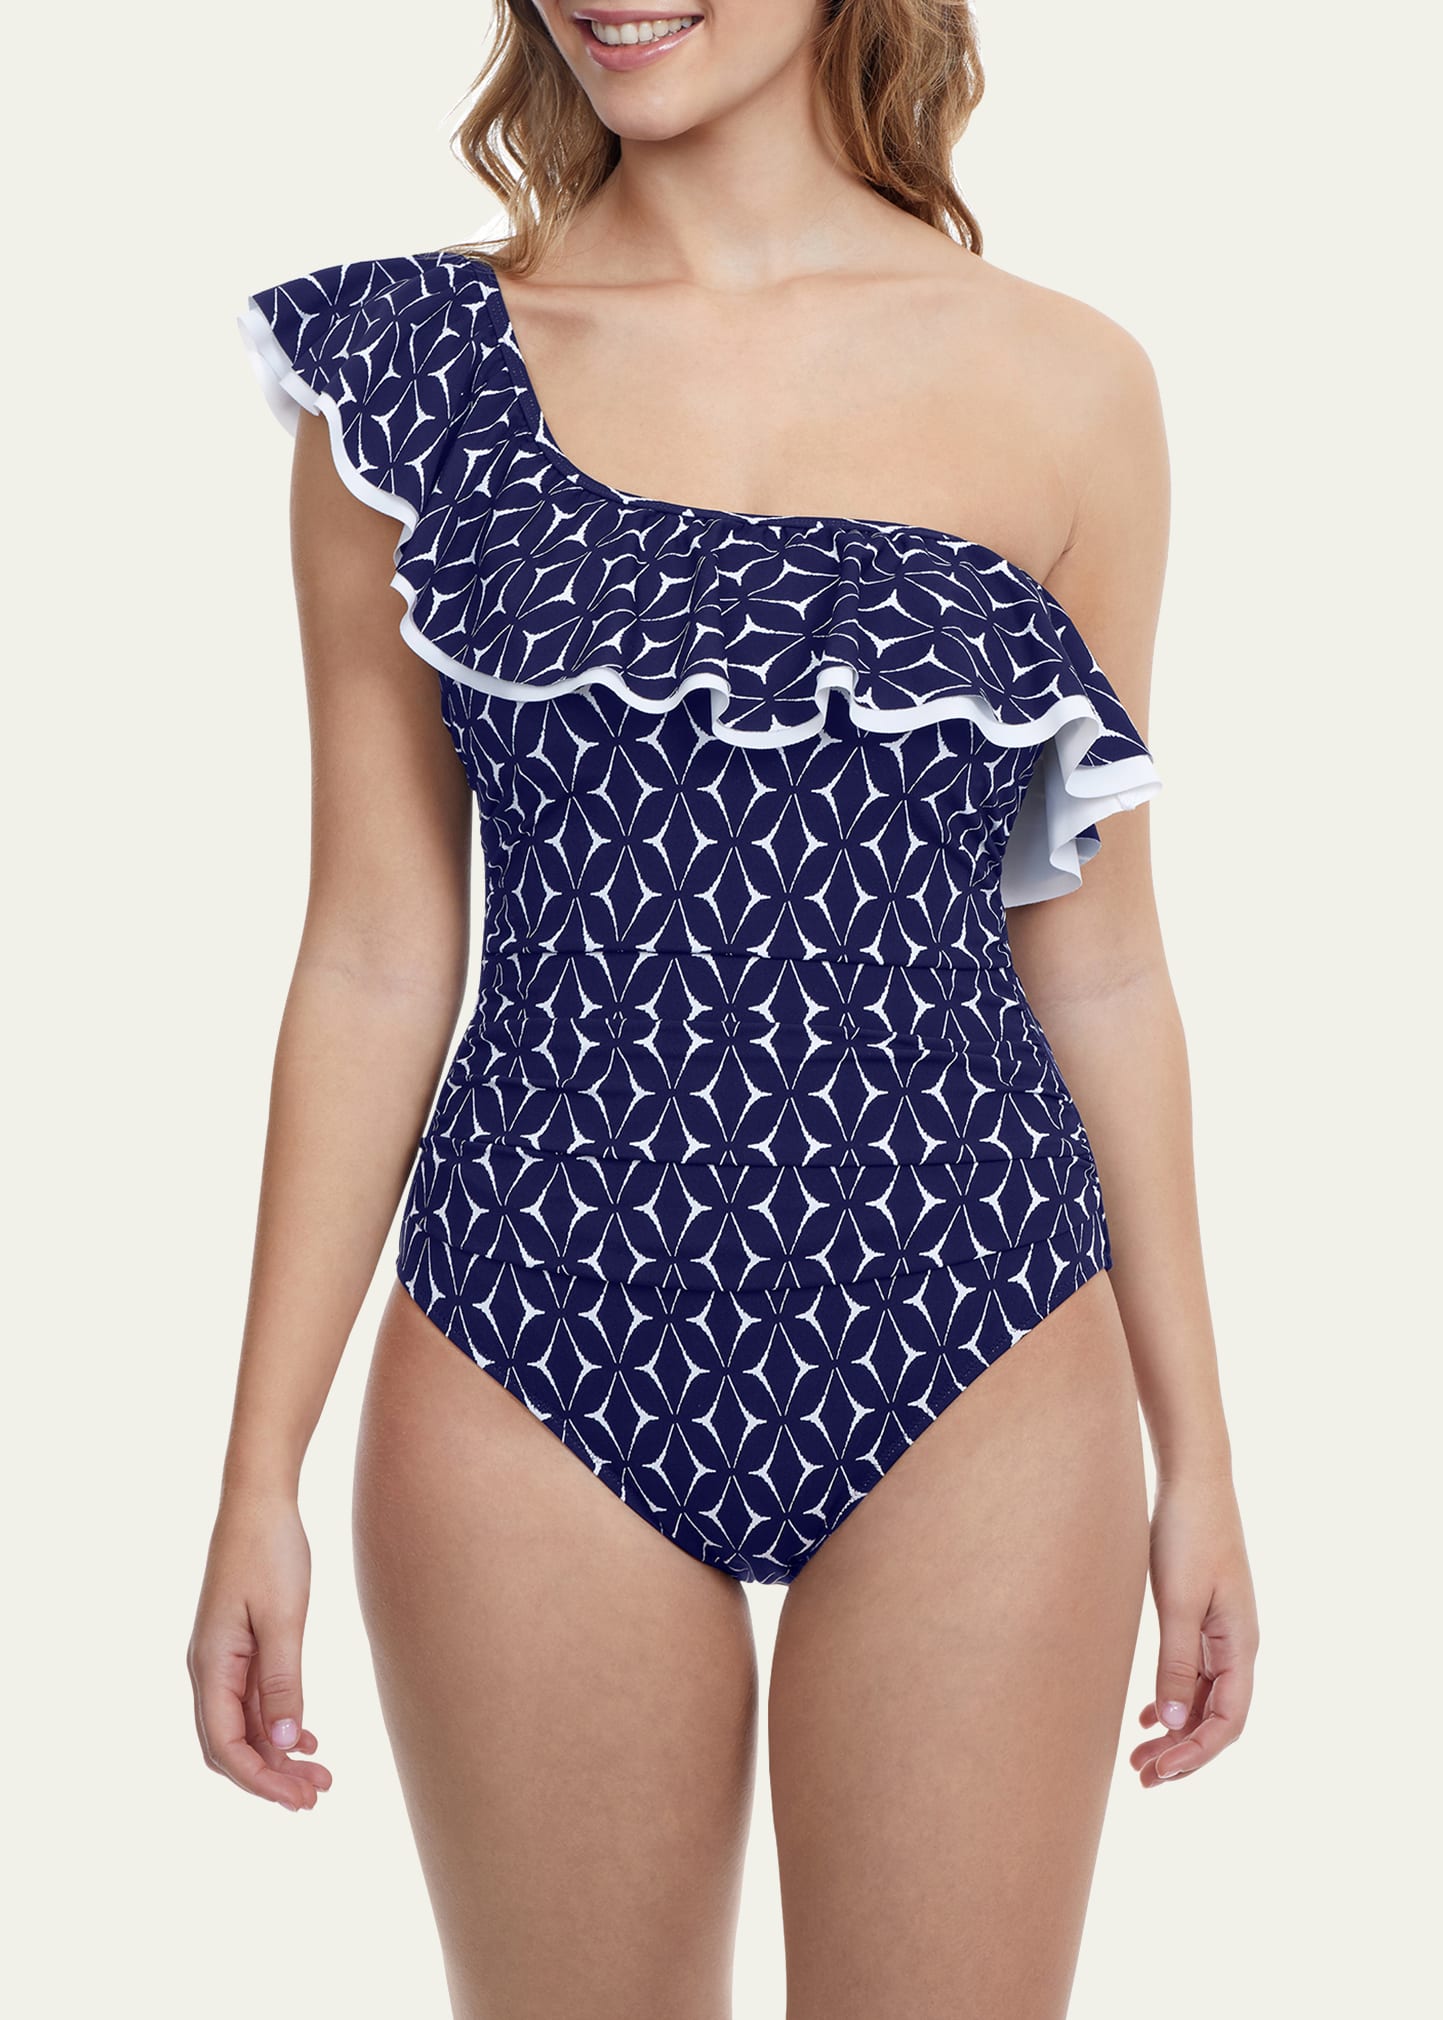 Supreme One-Shoulder One-Piece Swimsuit